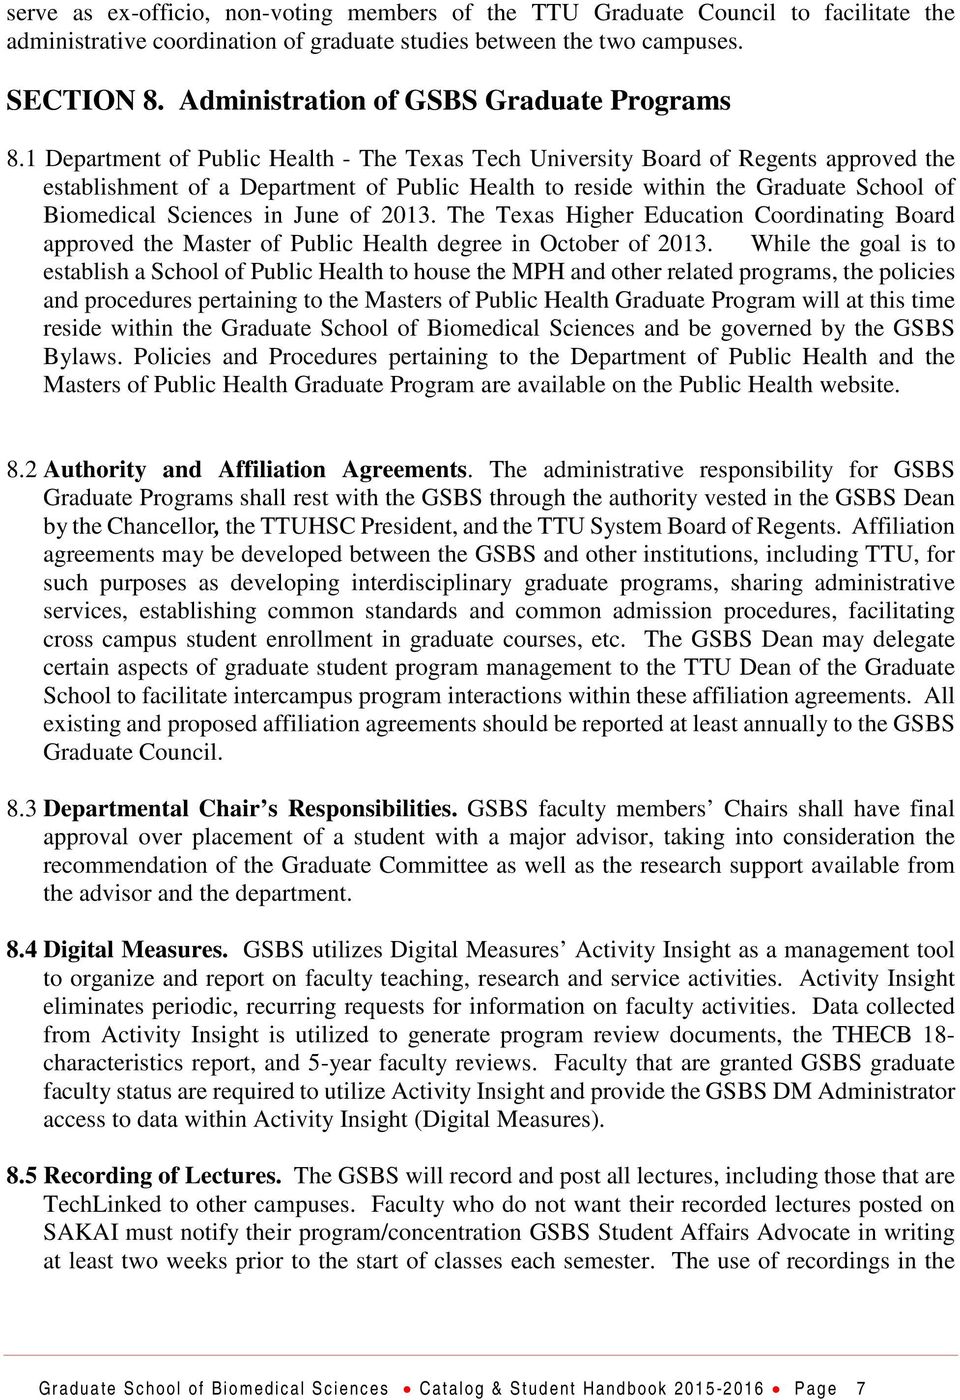 1 Department of Public Health - The Texas Tech University Board of Regents approved the establishment of a Department of Public Health to reside within the Graduate School of Biomedical Sciences in